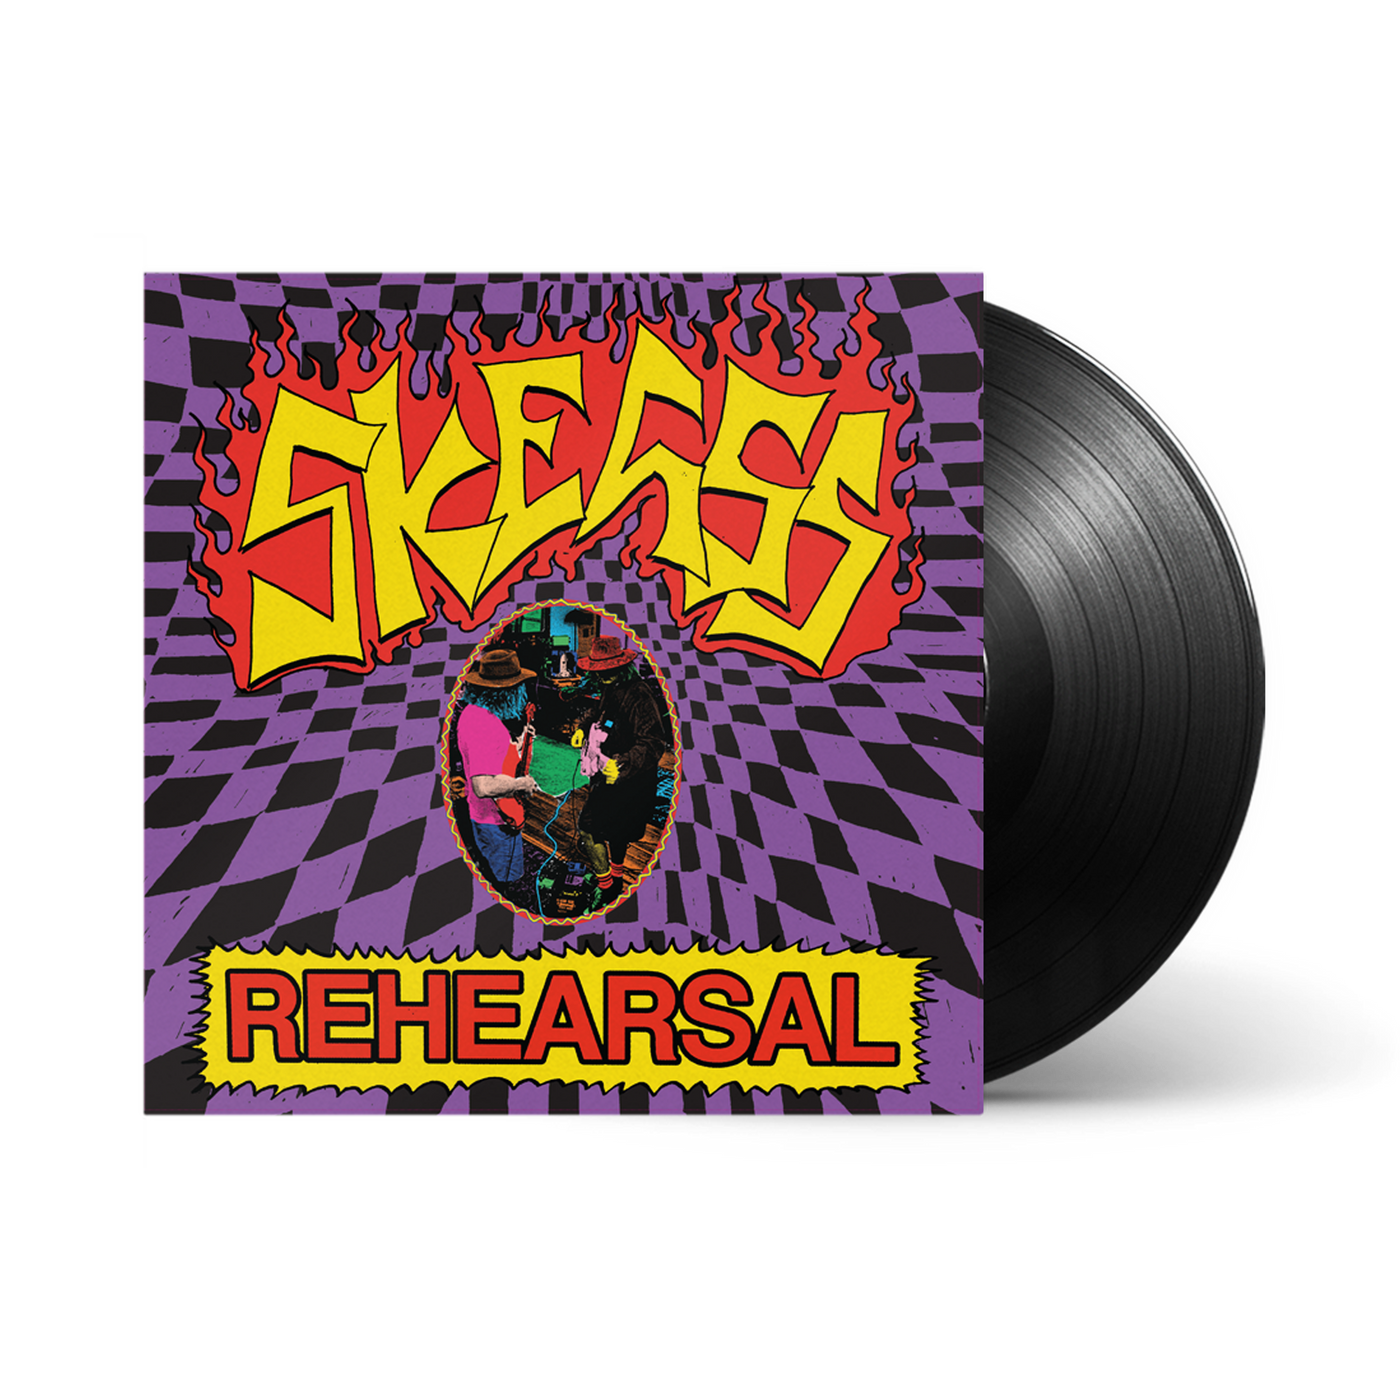 Rehearsal Standard LP Limited Edition Purple Cover